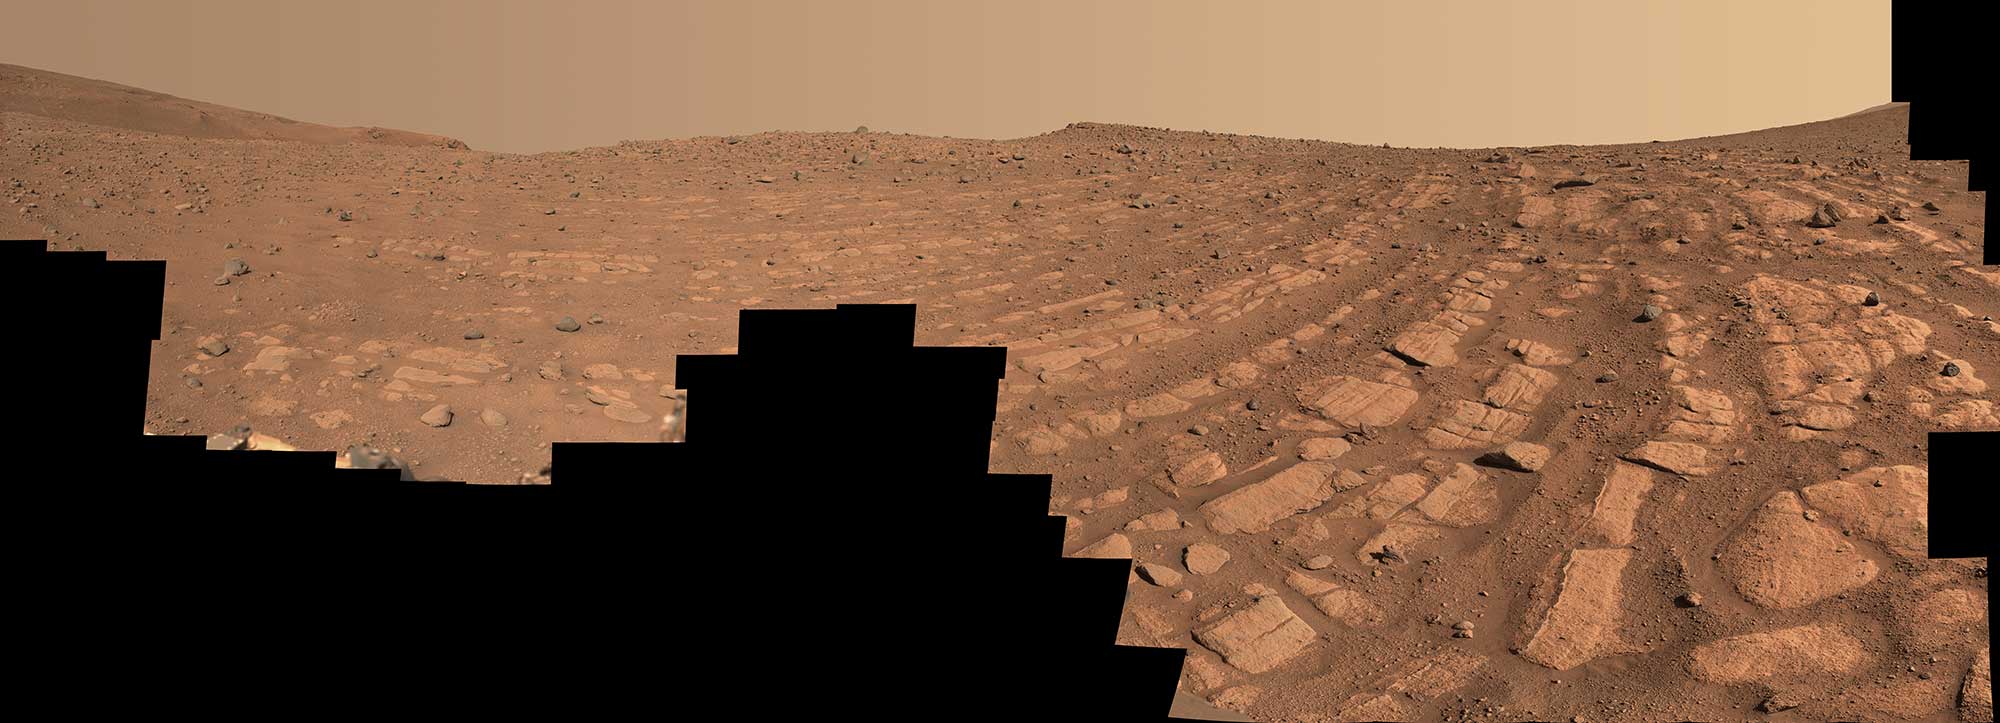 Perserverance Rover Captures First Ever Photos of a Powerful River on Another Planet